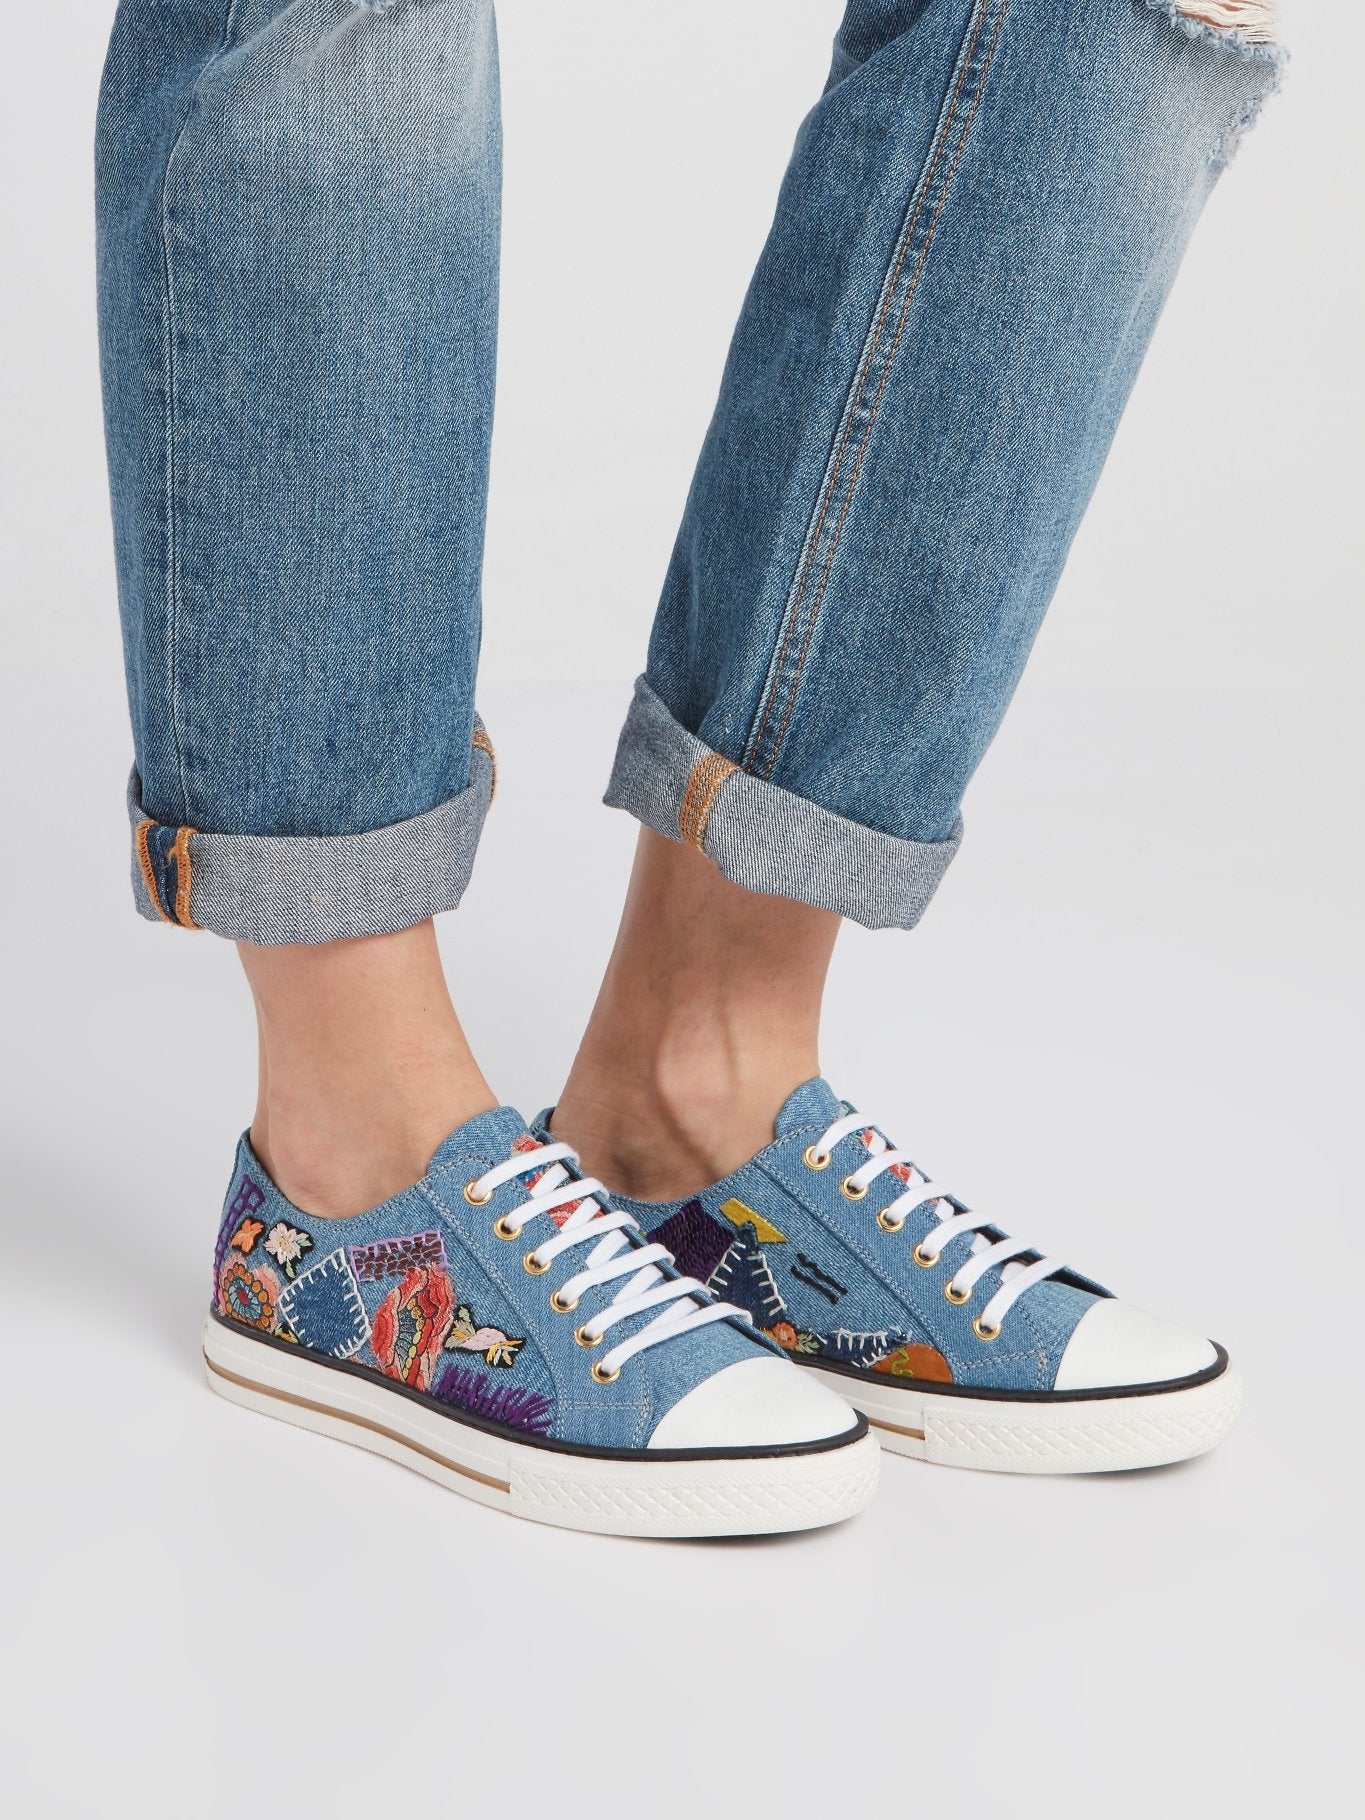 Blue Embroidered Denim Sneakers